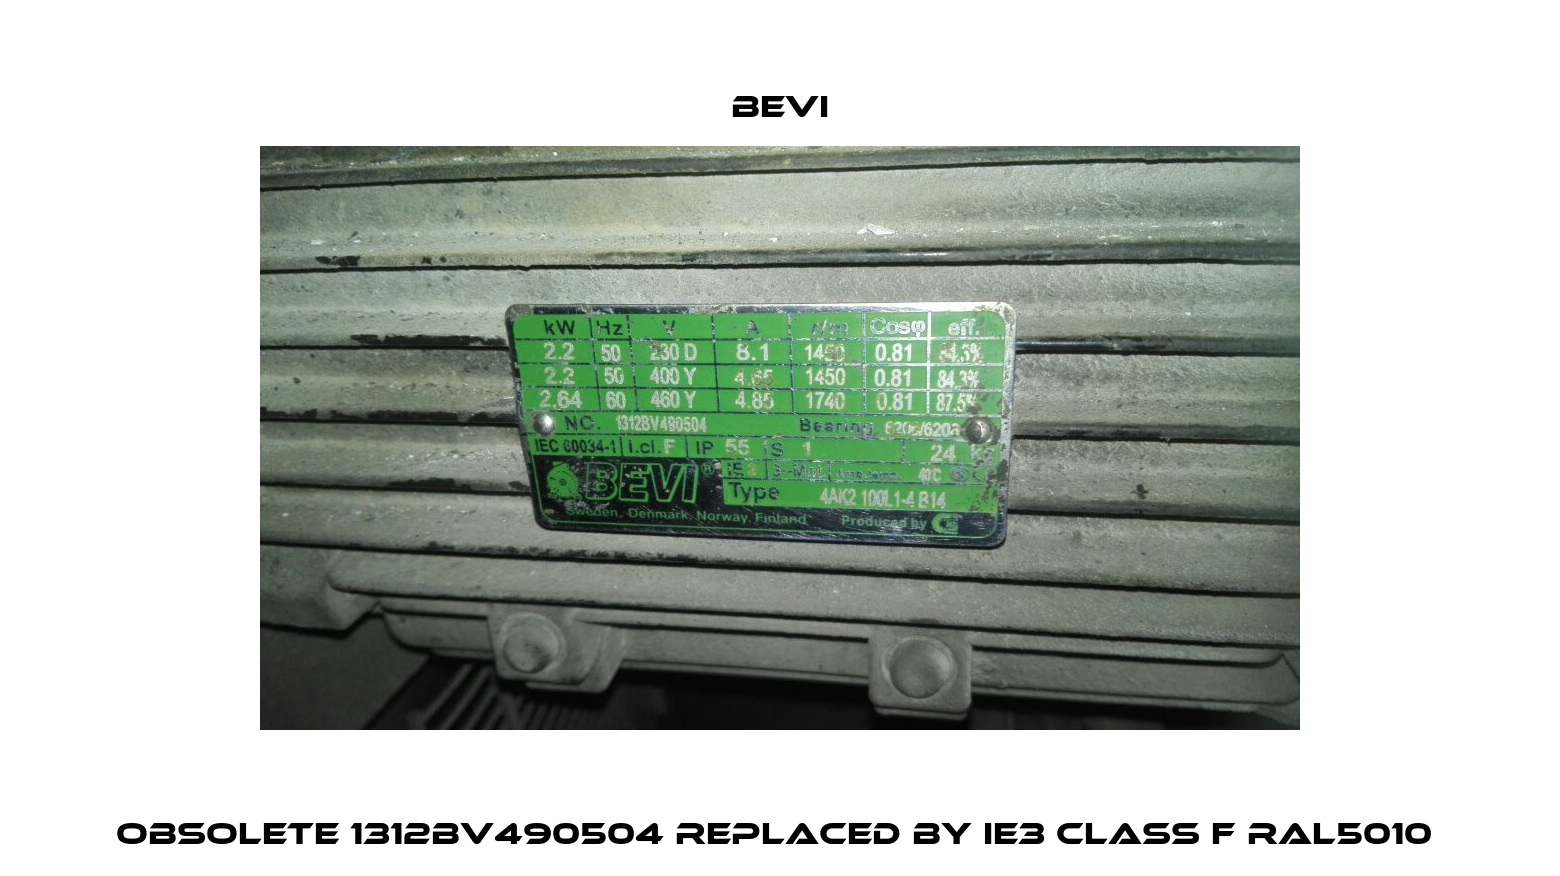 Obsolete 1312BV490504 replaced by IE3 class F RAL5010  Bevi